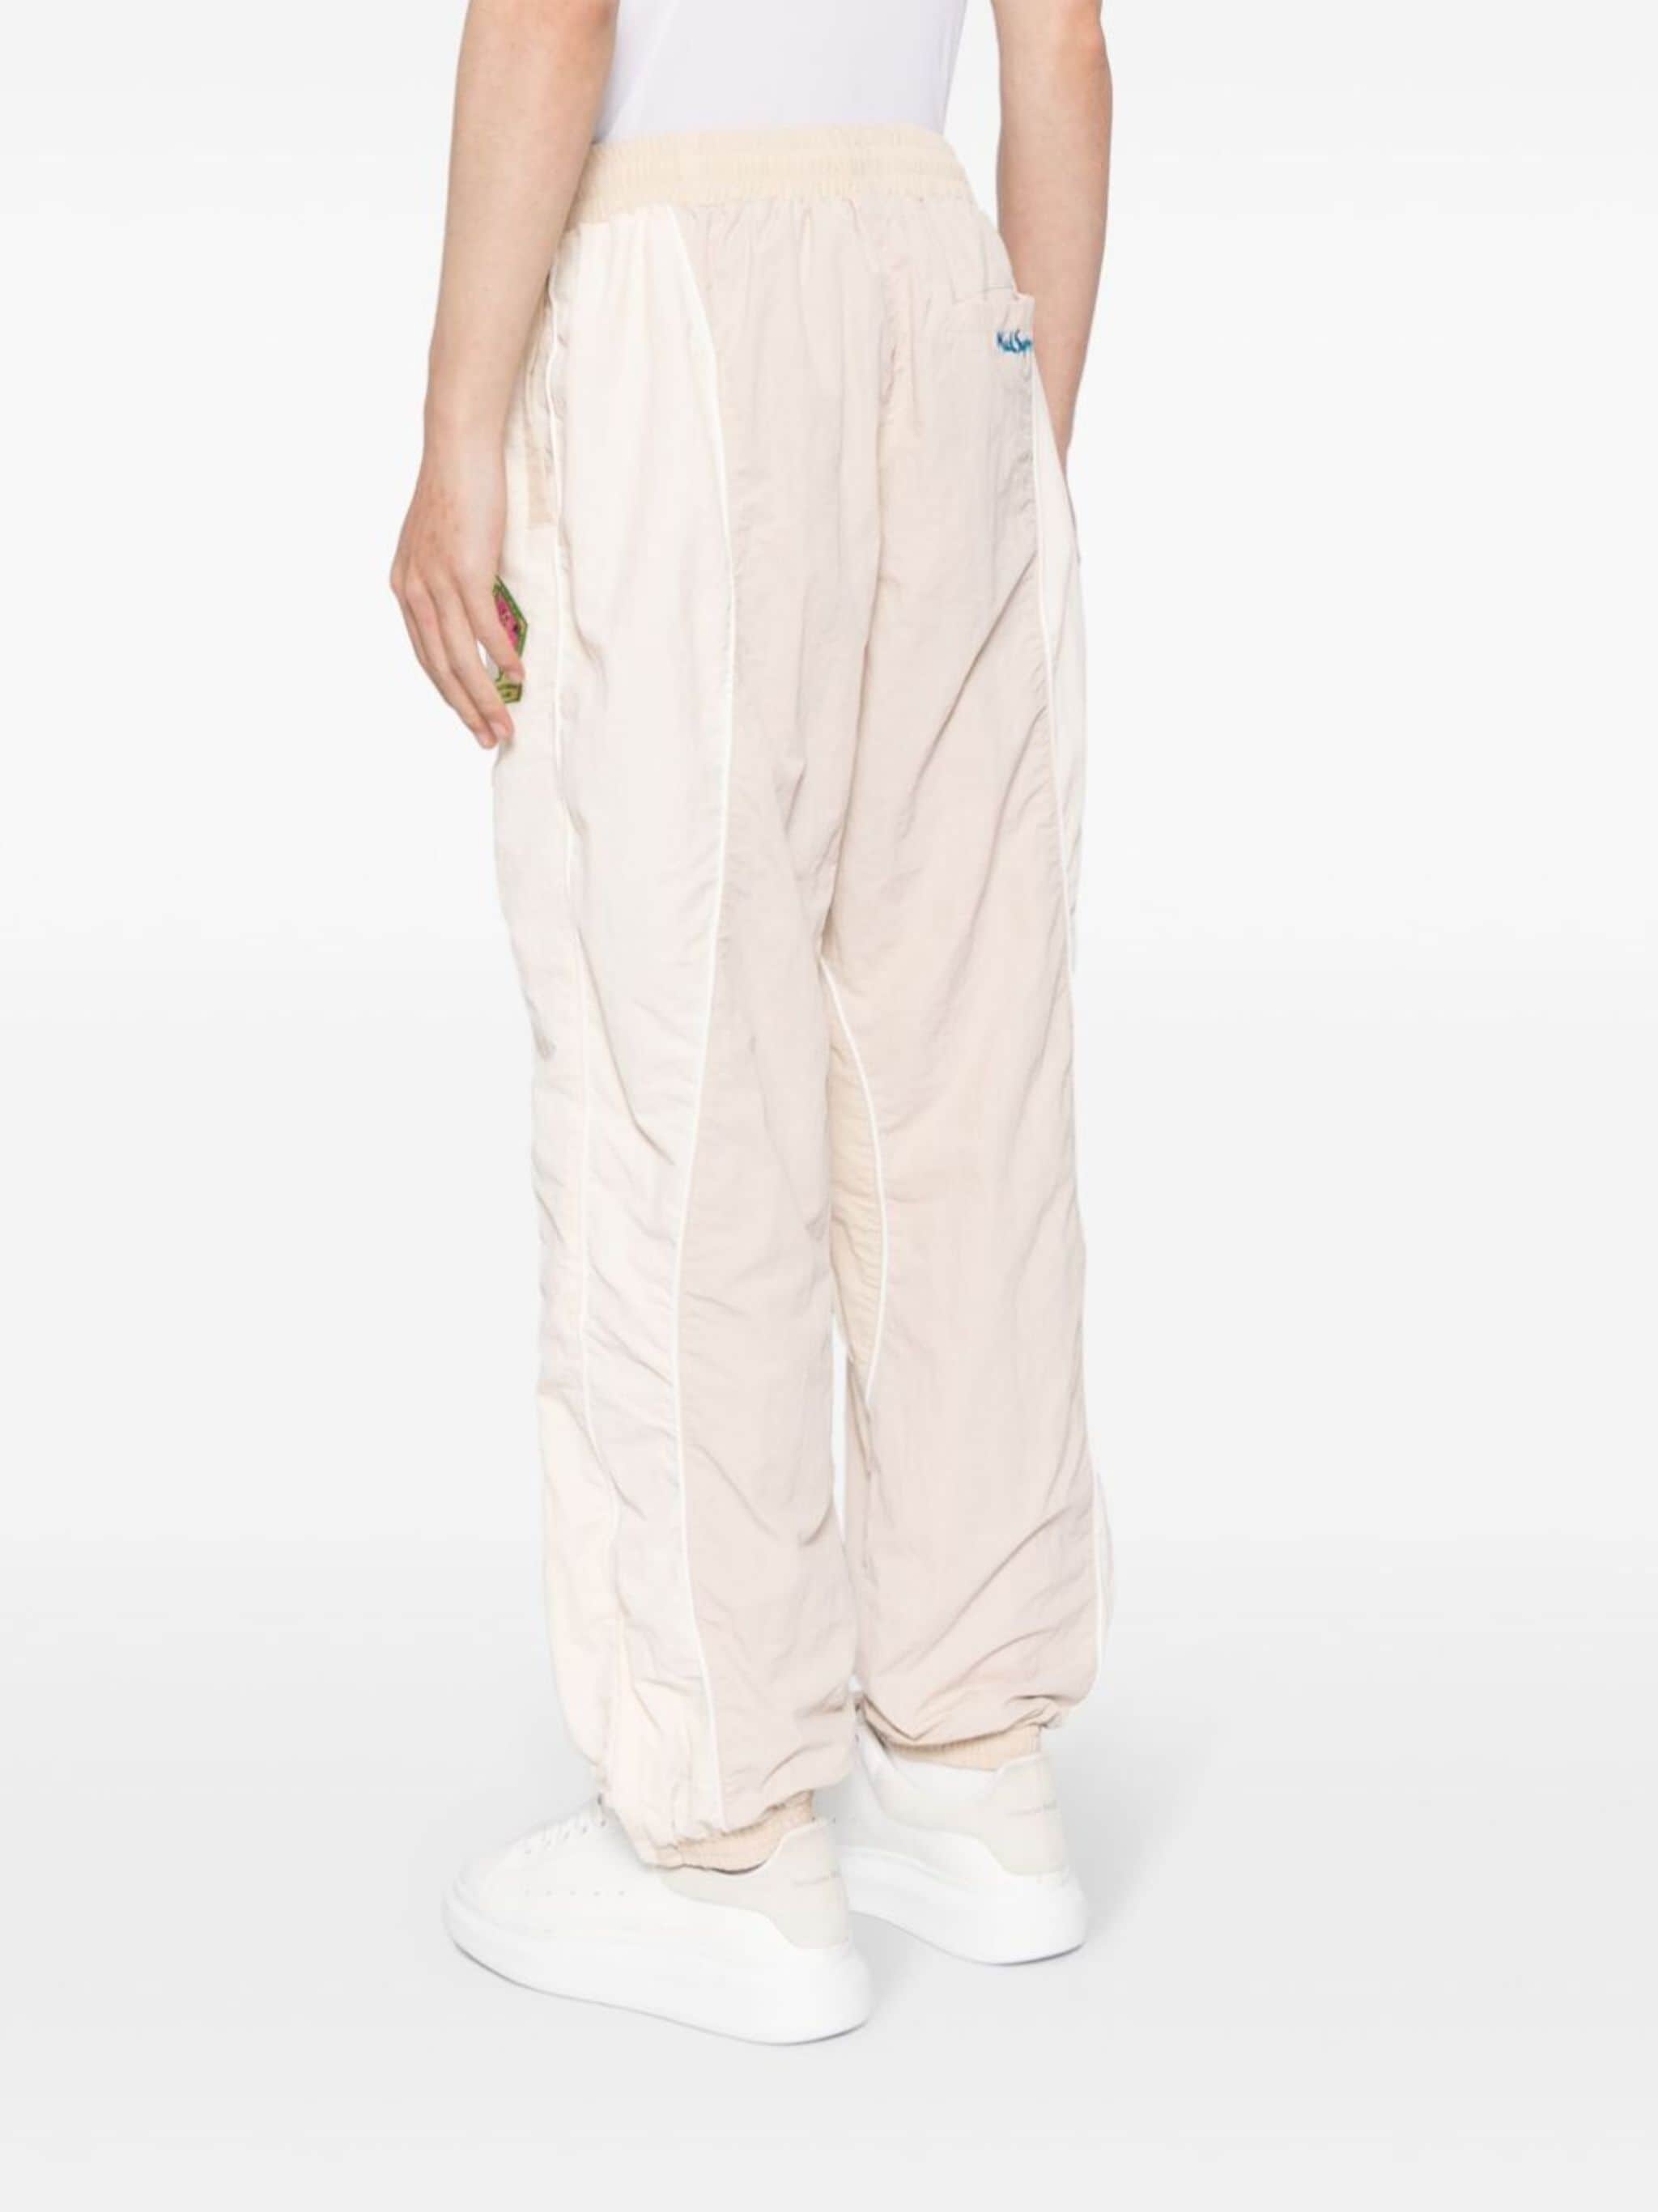 embroidered-motif track pants - 4